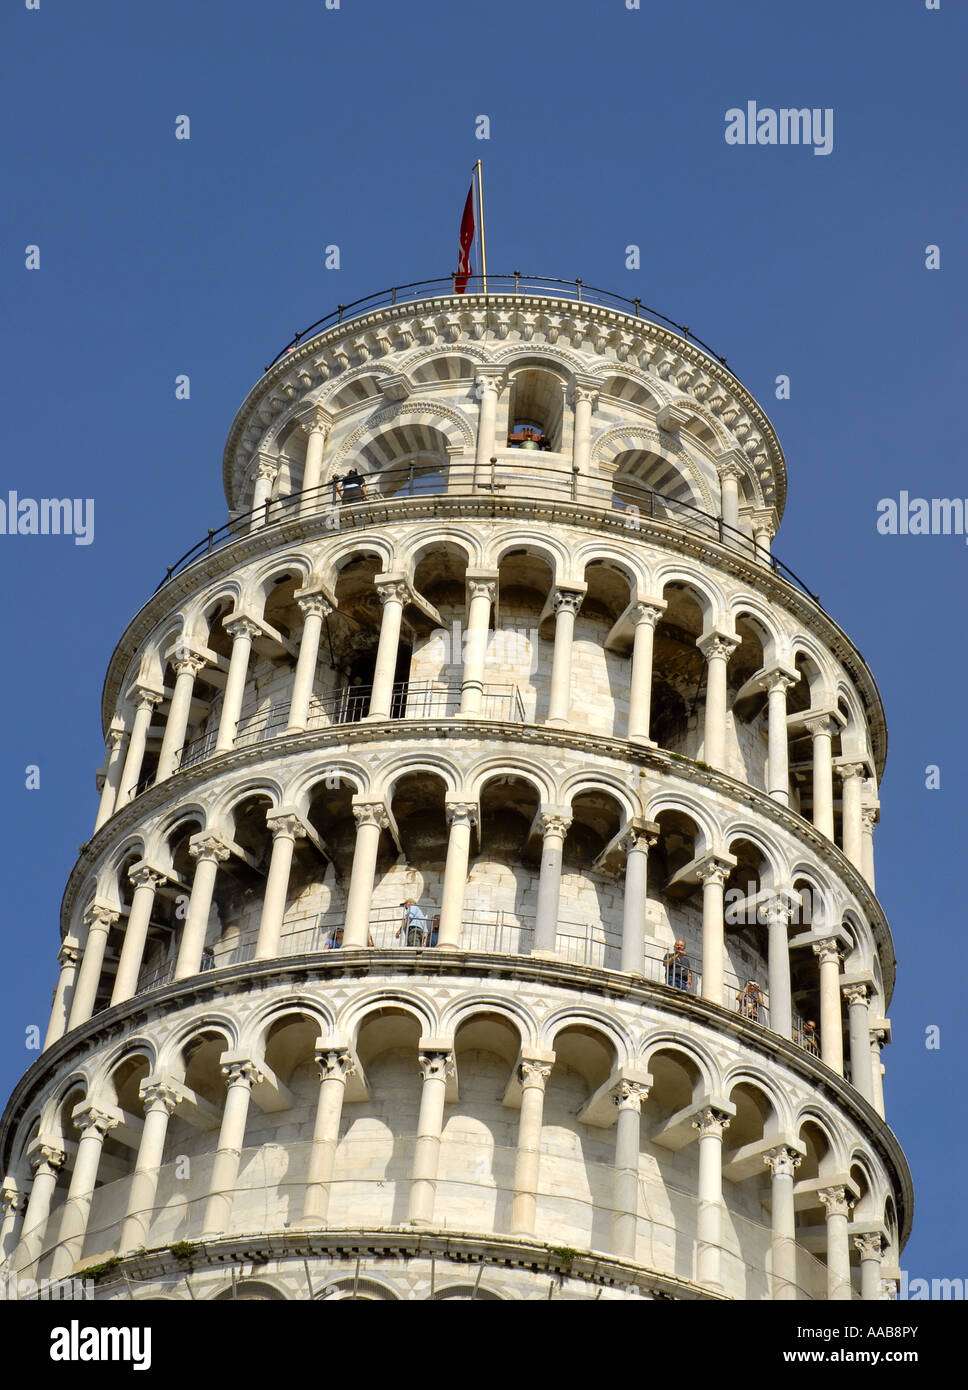 The Leaning Tower of Pisa. The 'Piazza dei Miracoli' undergoing restoration work. Tuscany, Italy. April 2007 Stock Photo